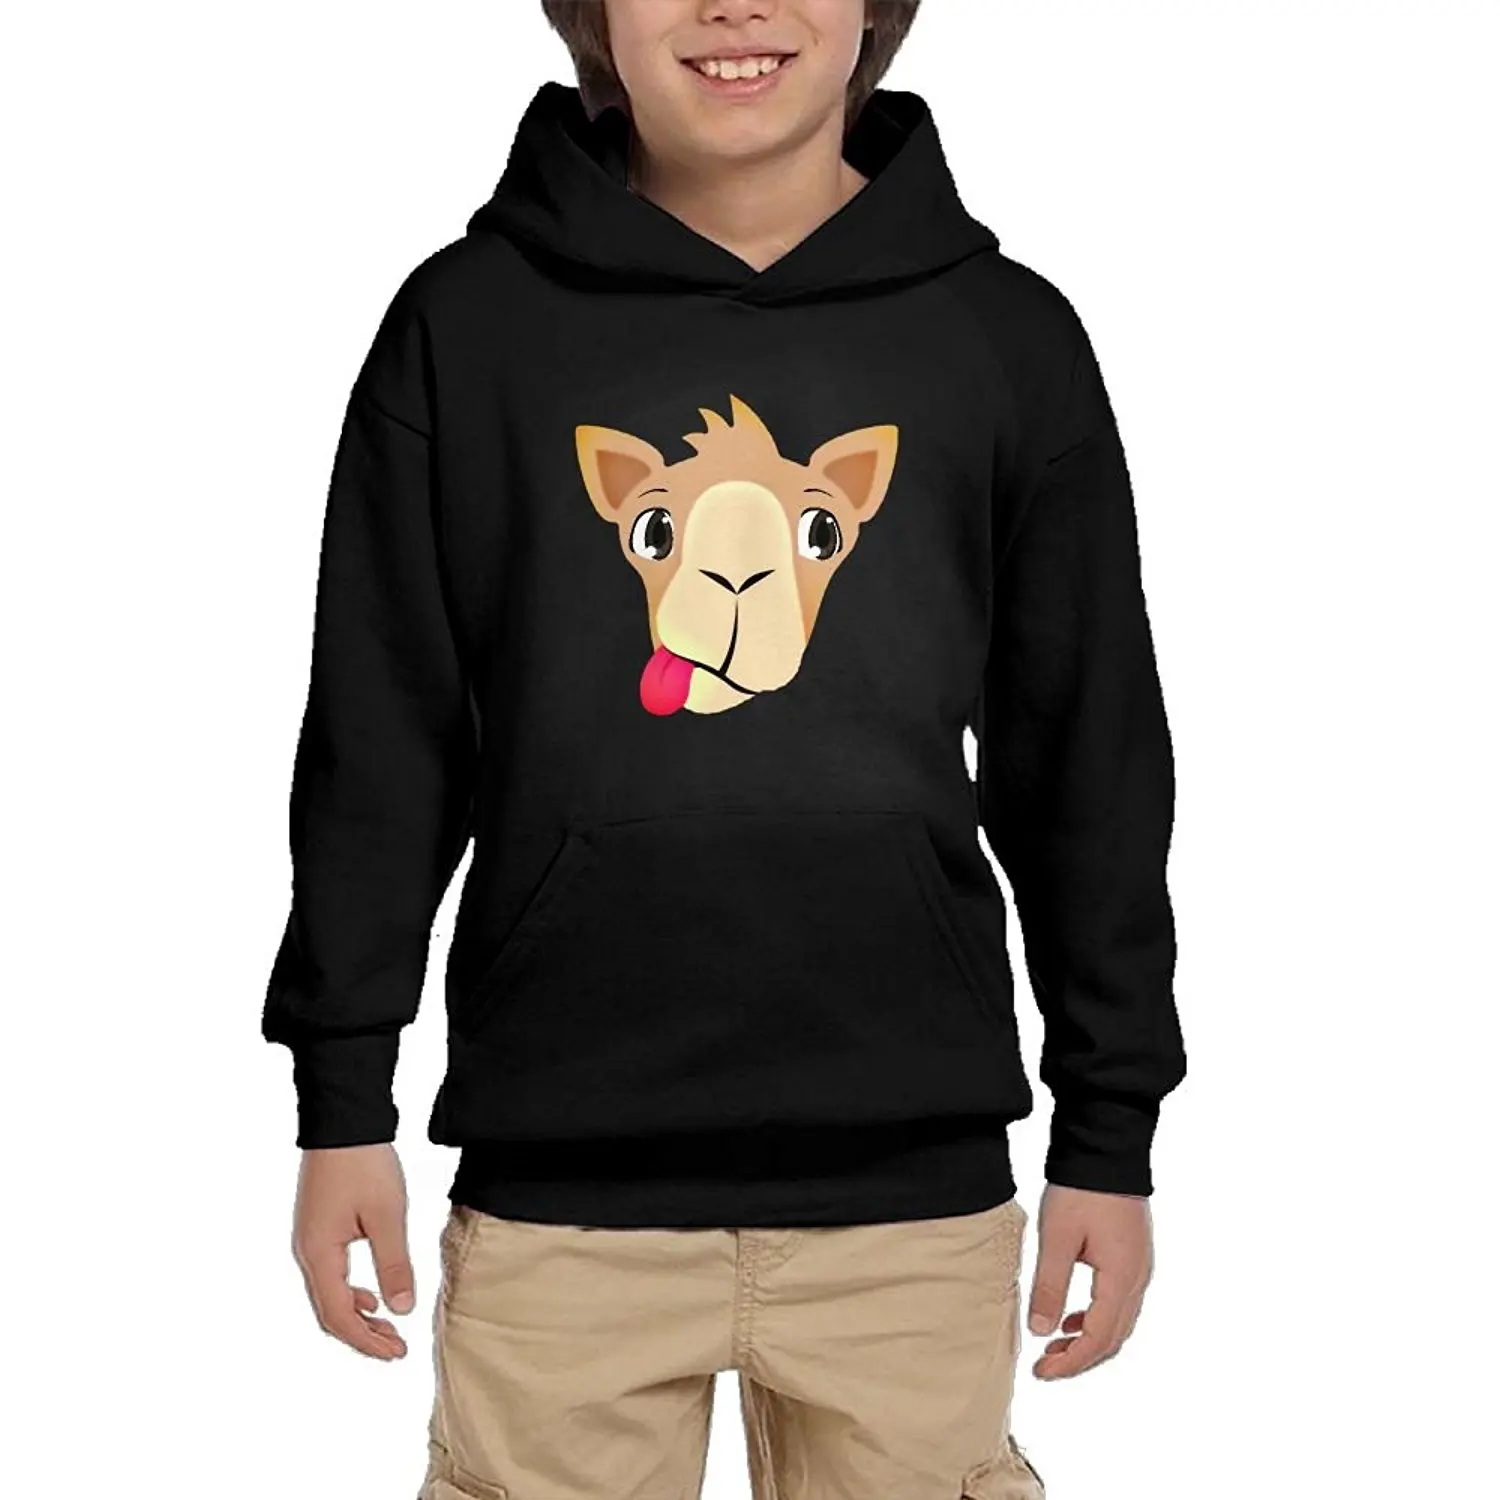 DTMN7 Giraffe Graphic Printed 100% Cotton Hoodie For Teens Spring Autumn Winter